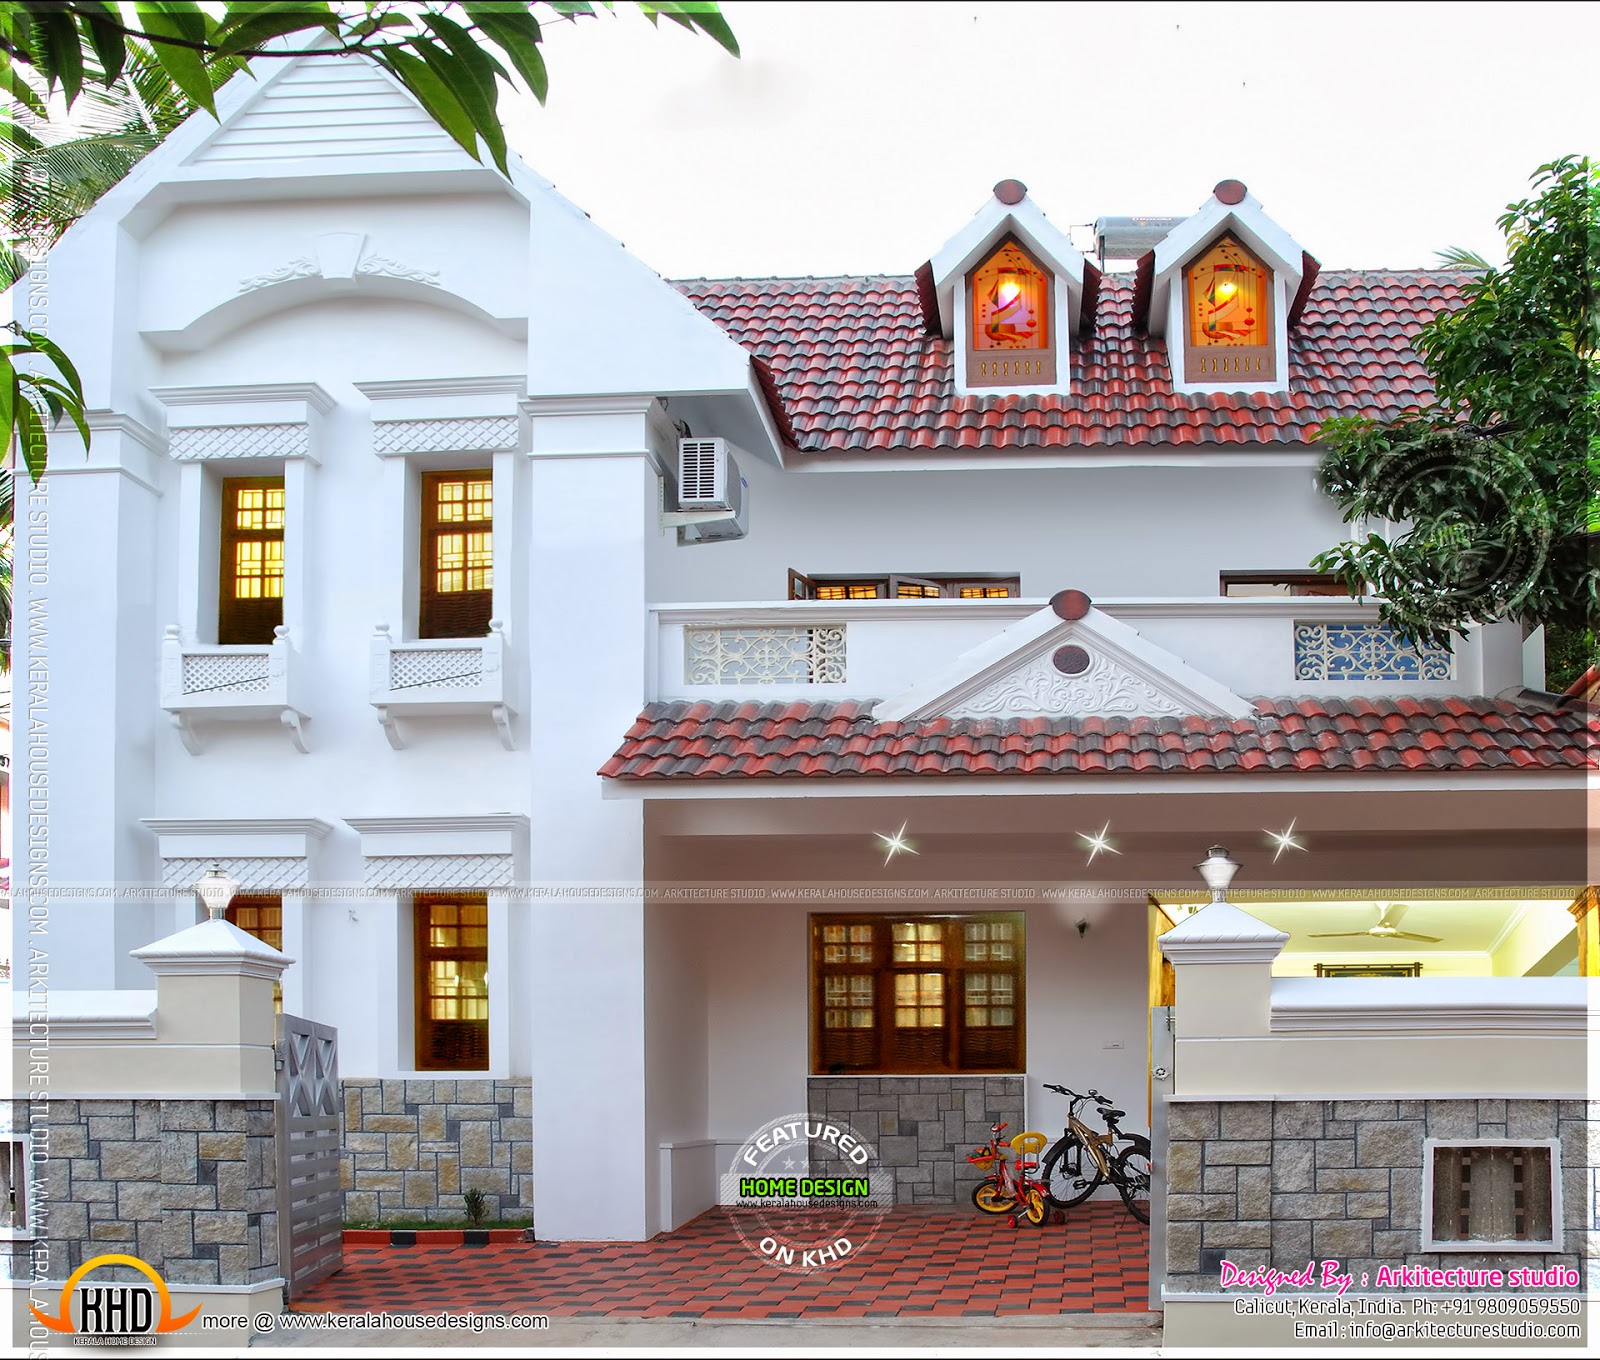  Real  house  in Kerala with interior photos  Home  Kerala Plans 